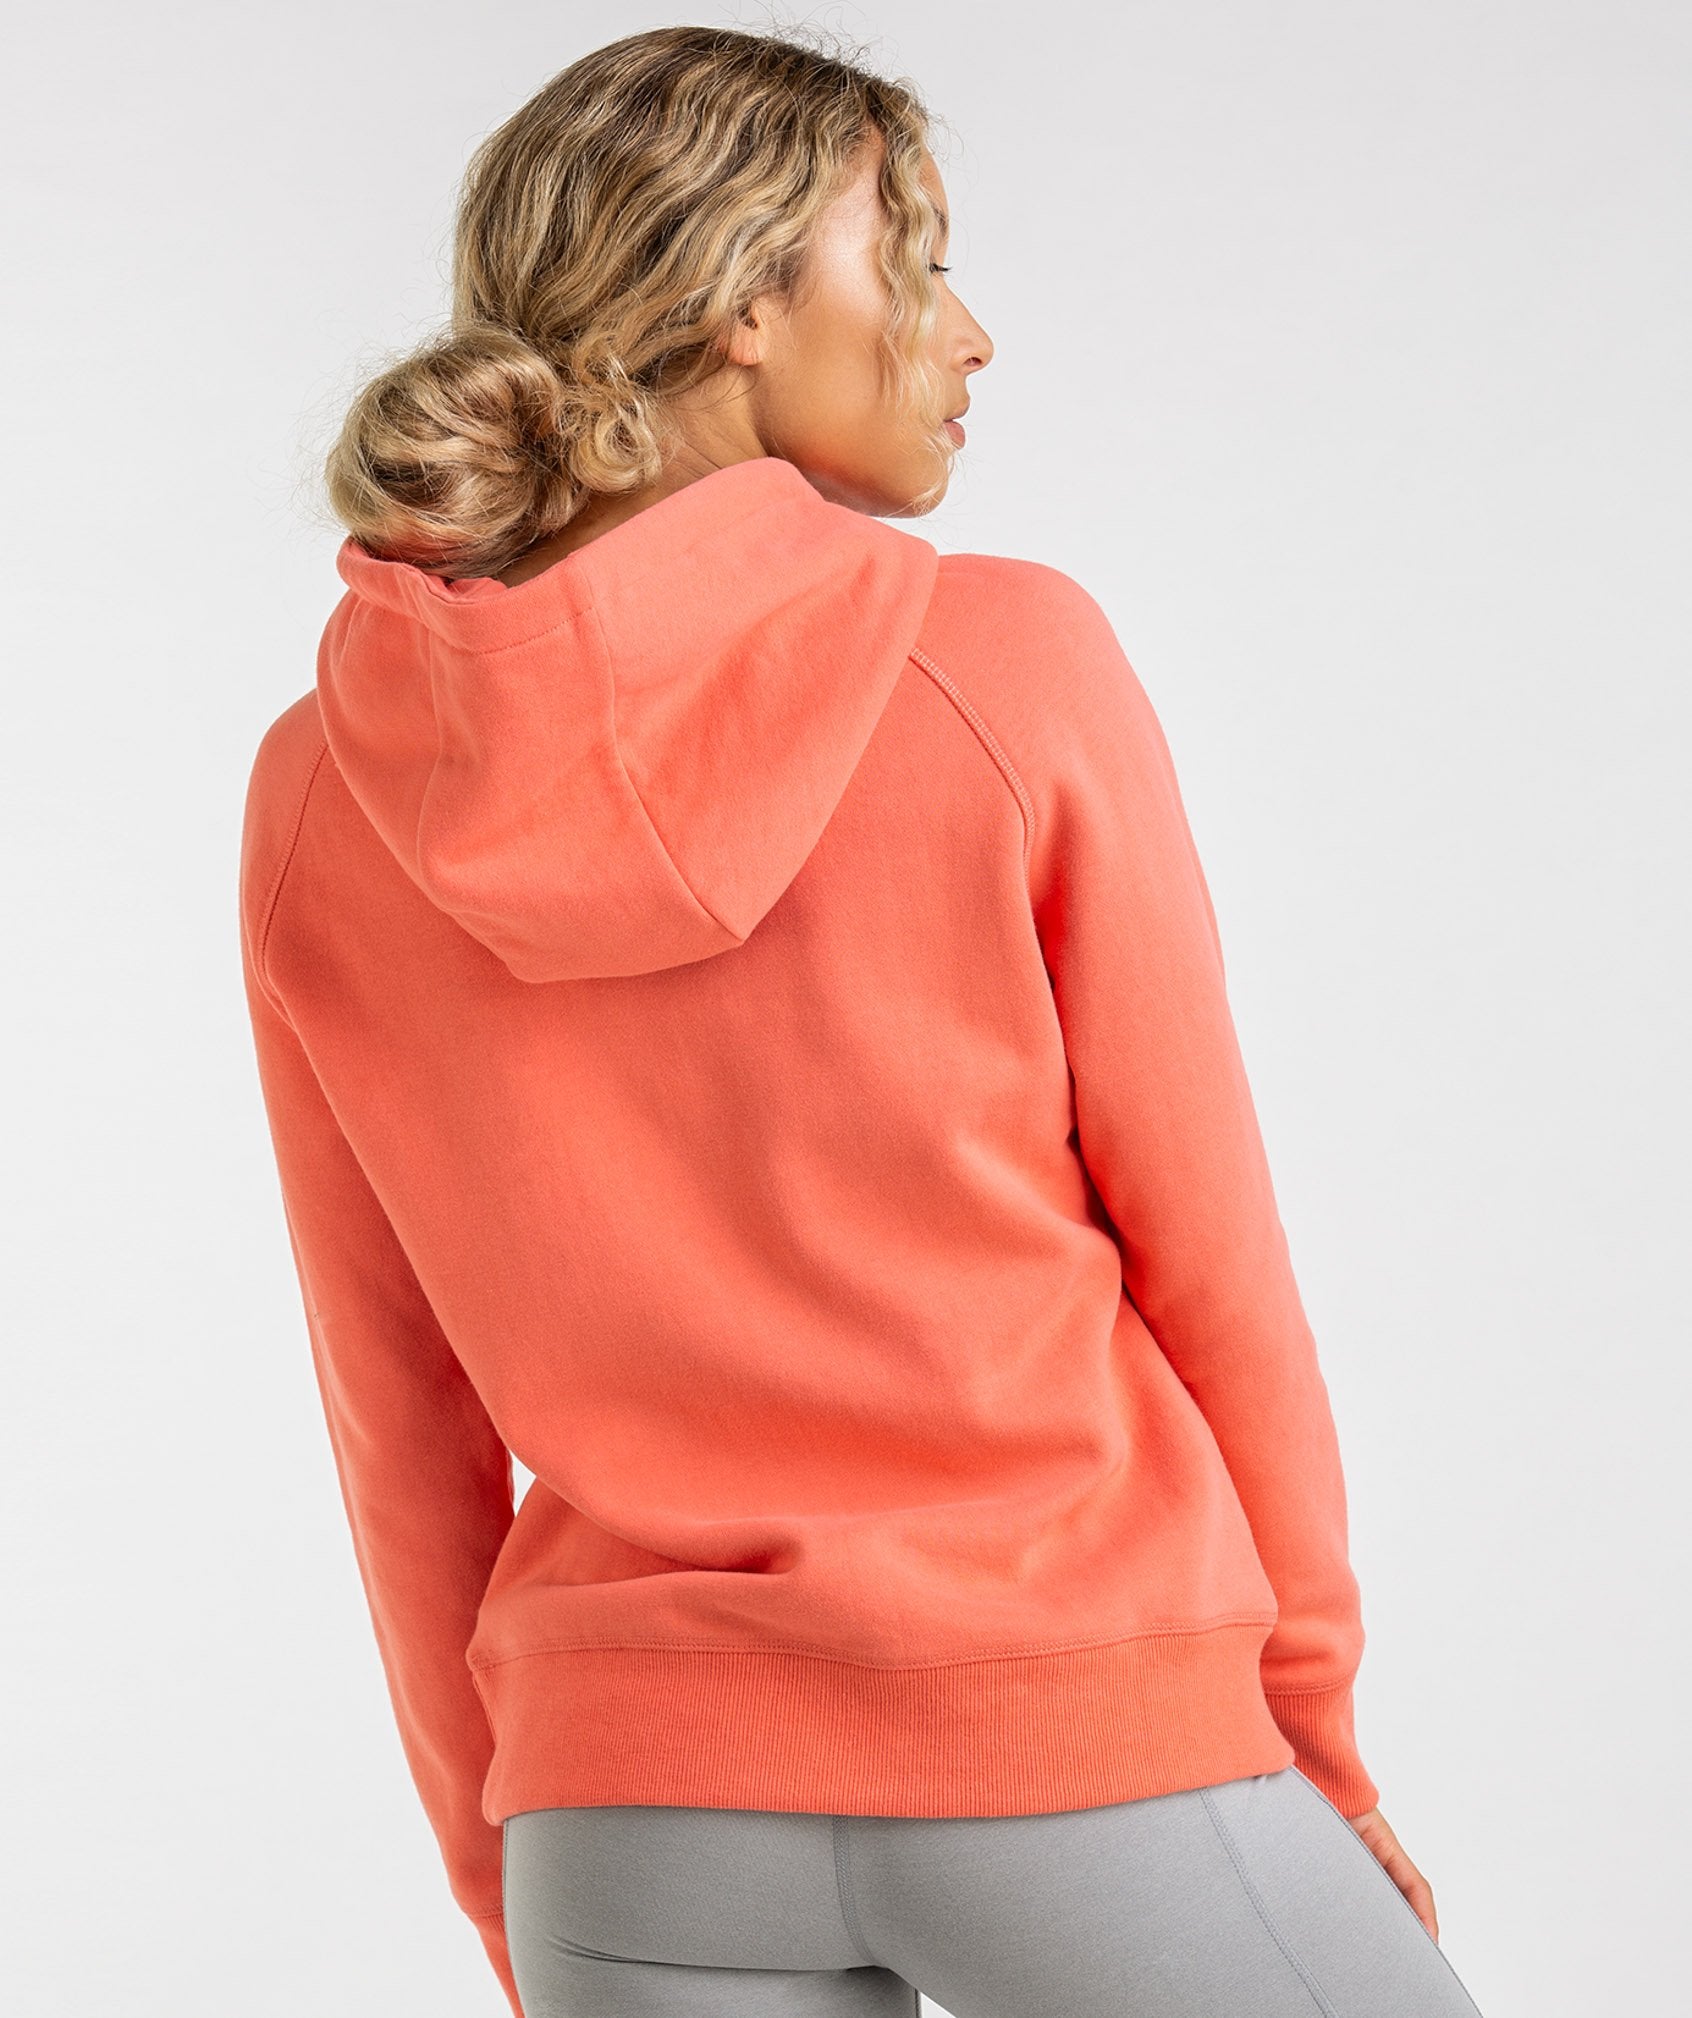 Crest Hoodie in Peach Coral - view 2